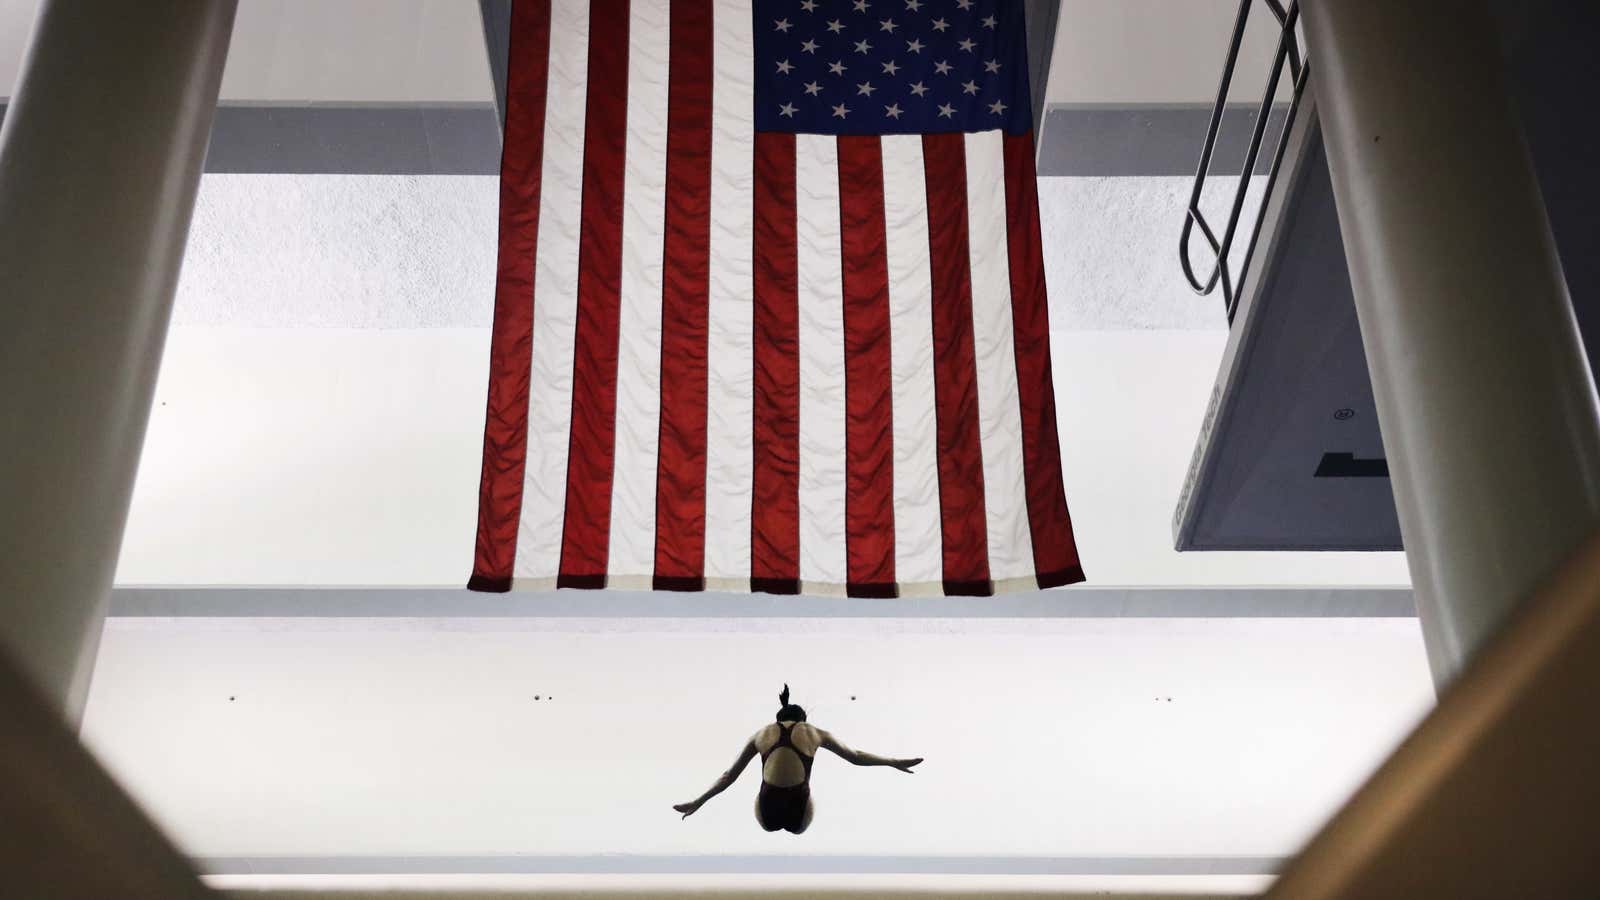 Harvard’s Jing Leung descends past a United States flag during the platform diving at the NCAA women’s swimming and diving championships at Georgia Tech Saturday, March 19, 2016, in Atlanta. (AP Photo/David Goldman)